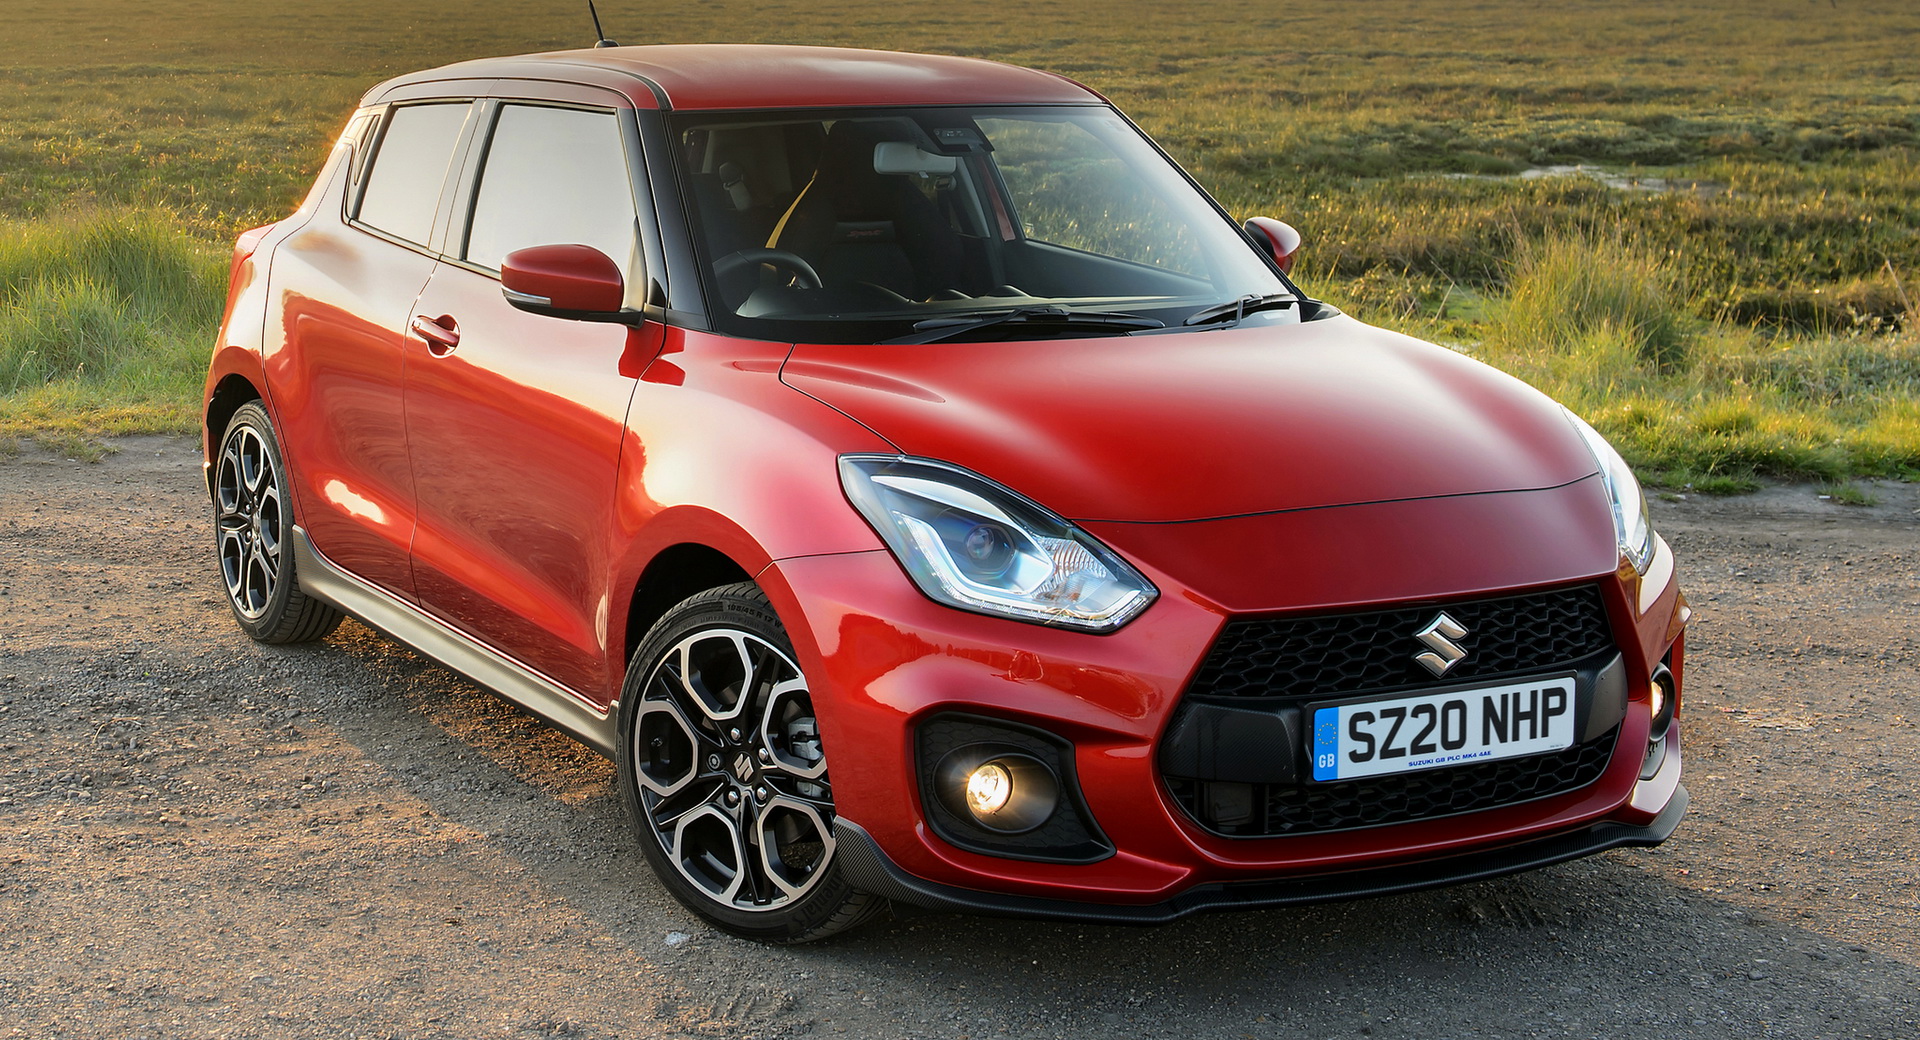 2020 Suzuki Swift Sport Gains Hybrid System, Loses 10 HP In The Process |  Carscoops